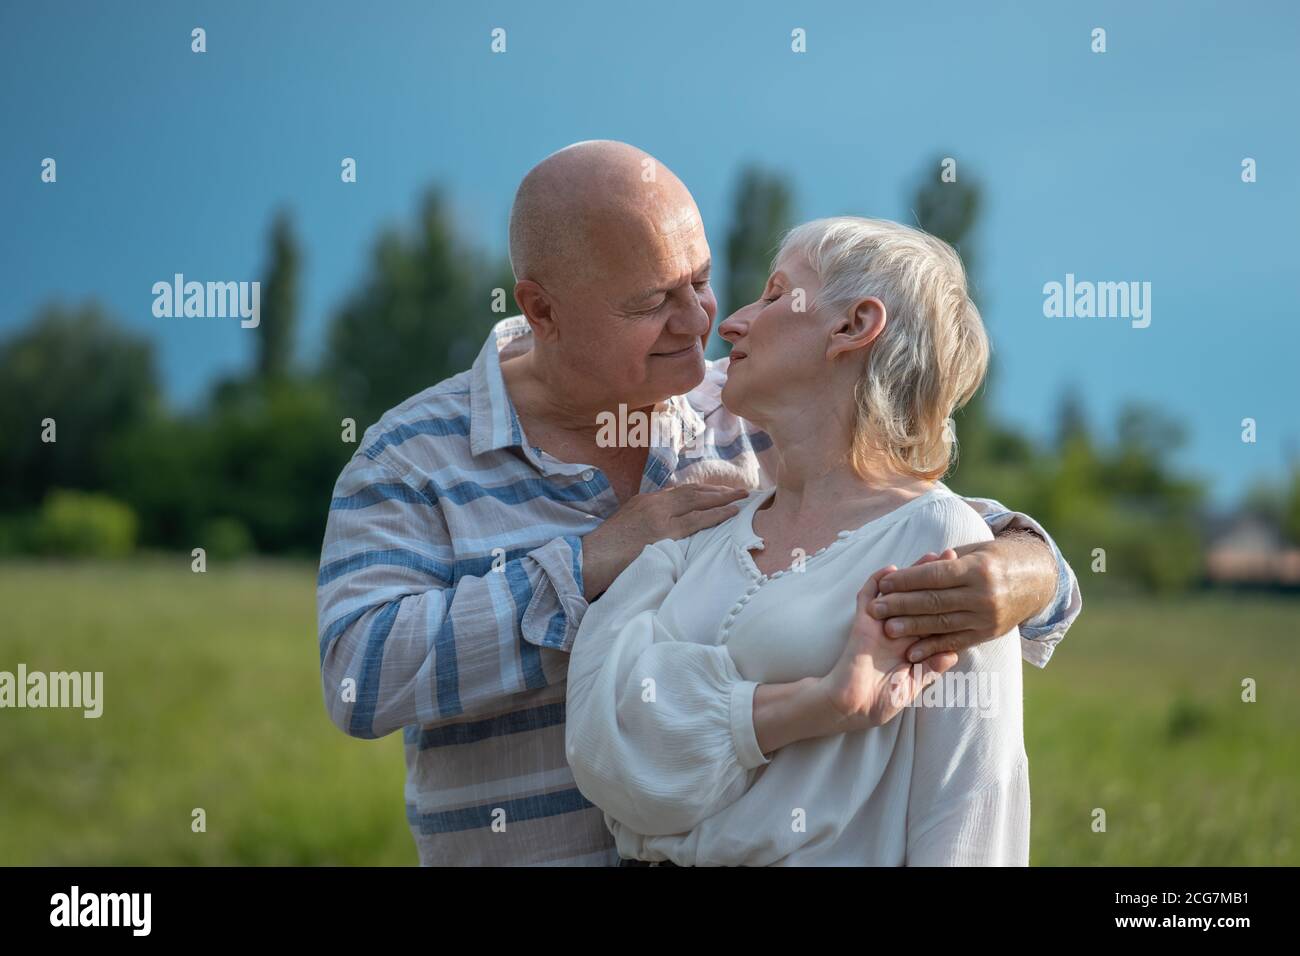 happy senior couple dating, hugging and kissing outdoor at sunset Stock Photo